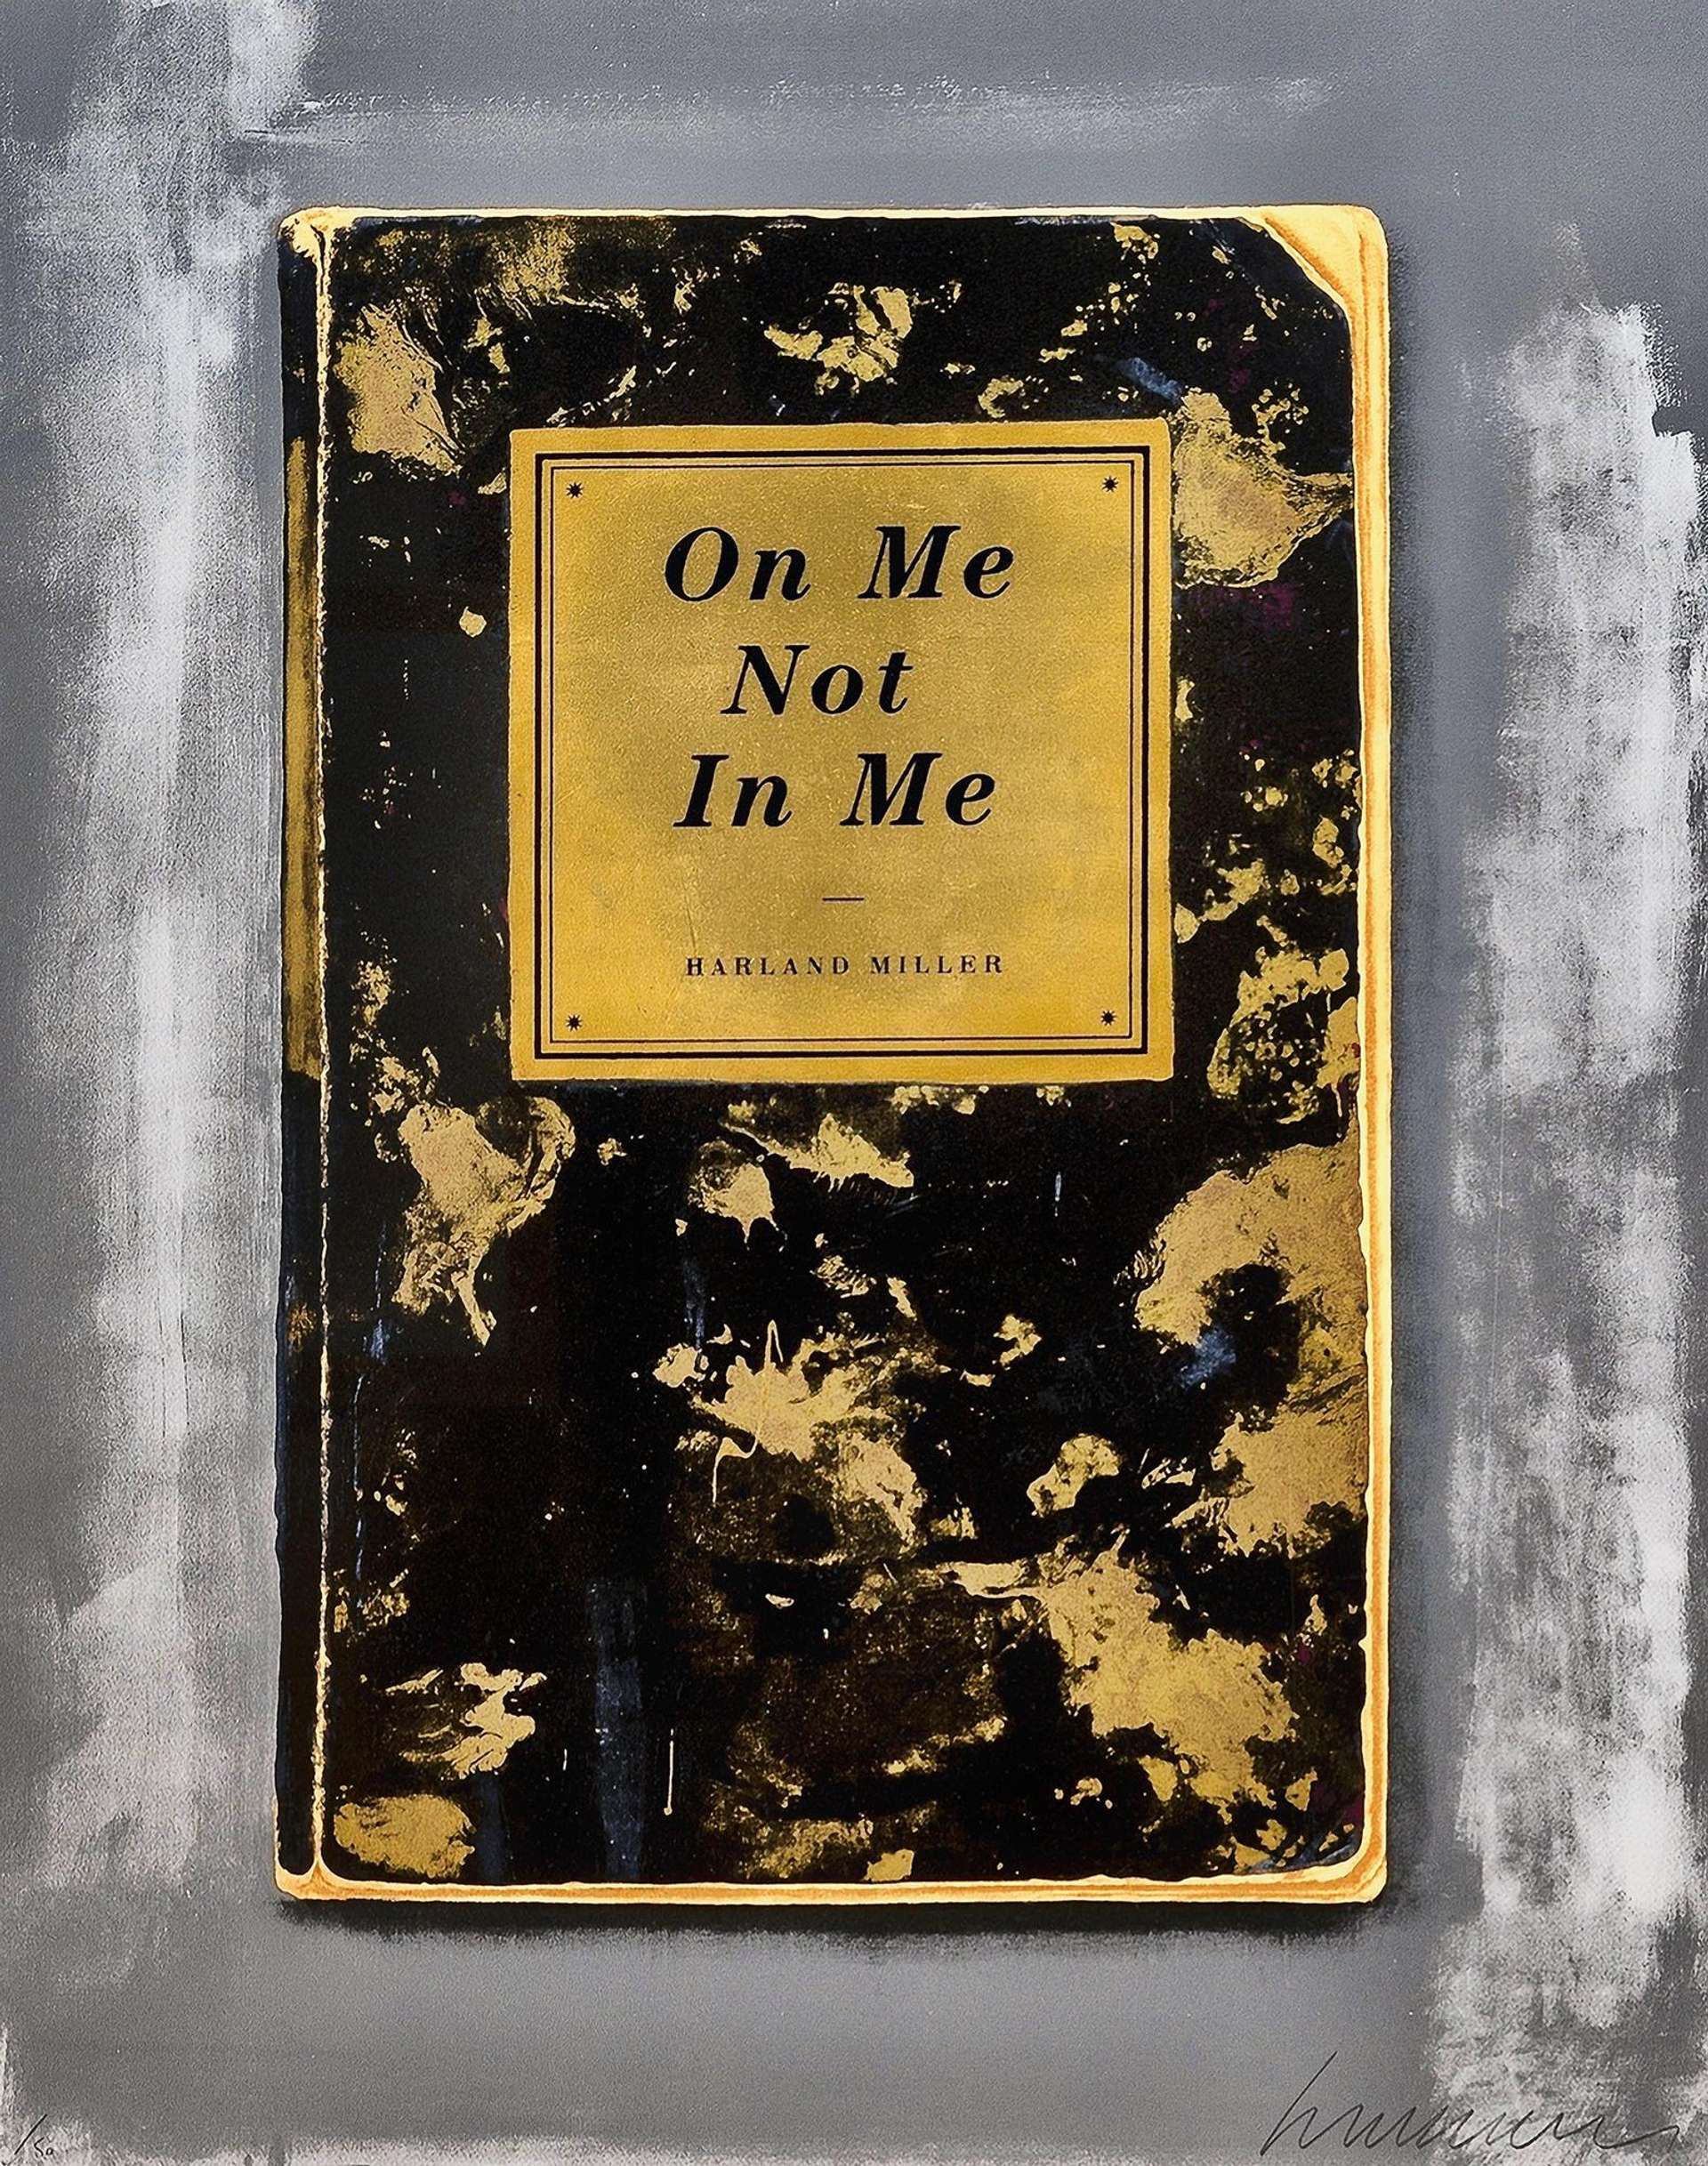 A black book cover with gold accents that reads “On Me Not In Me”